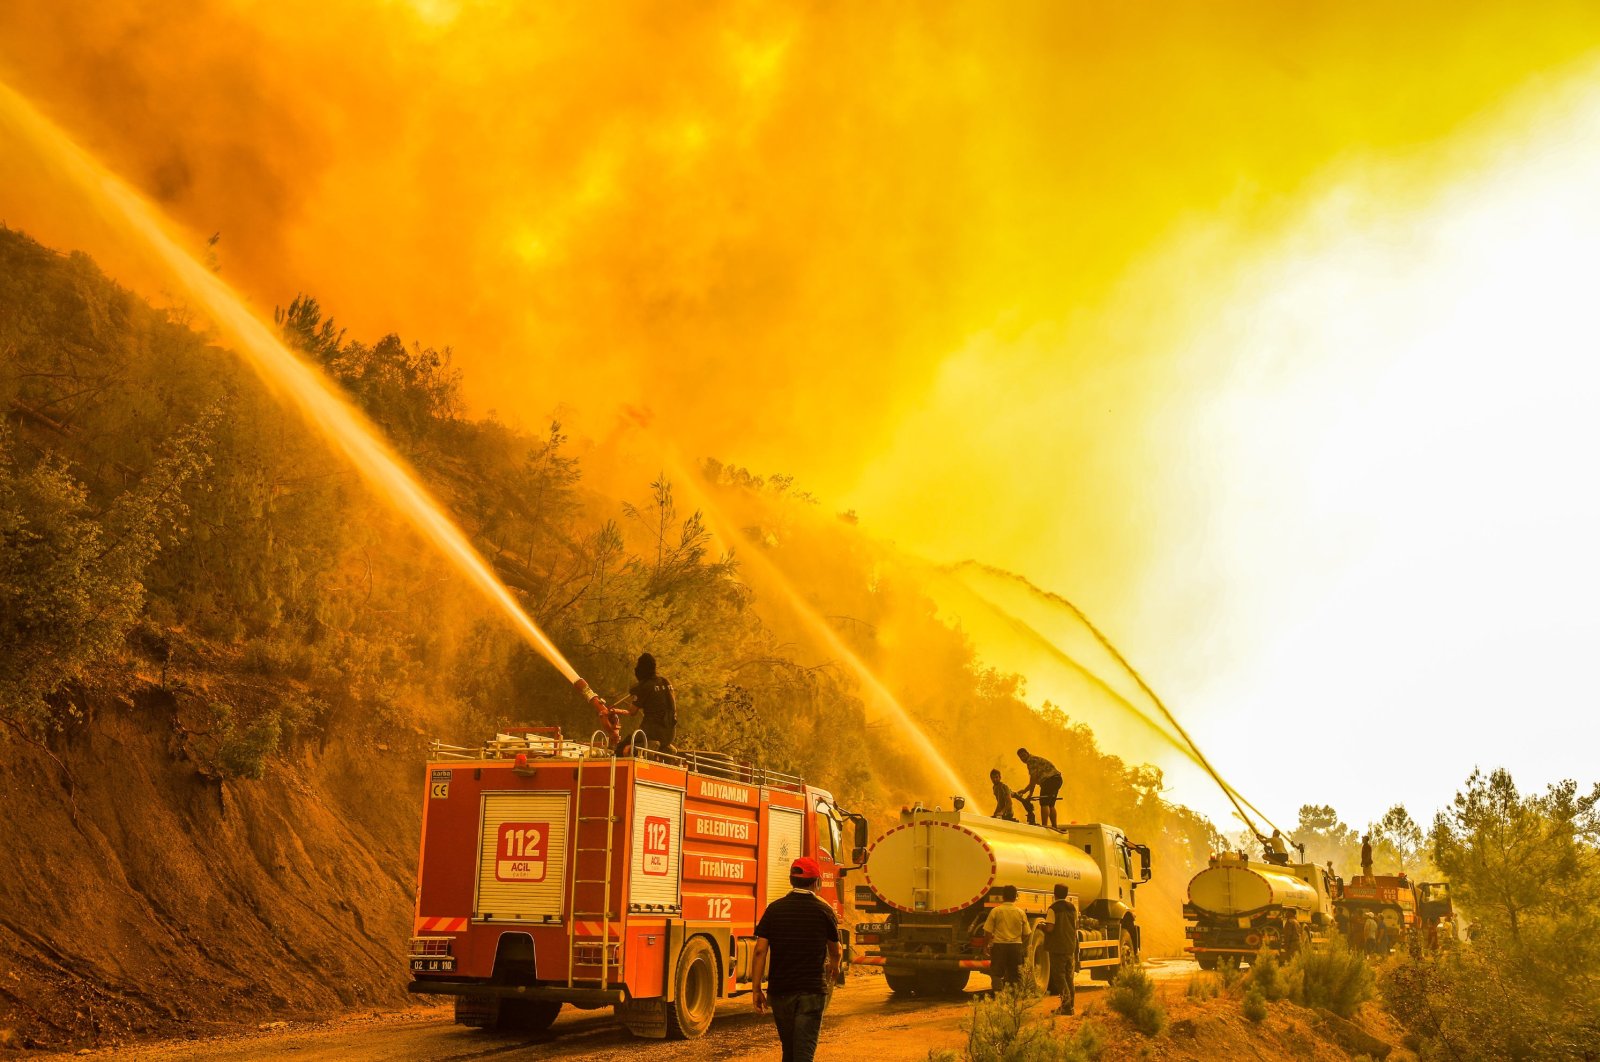 Firefighters spray water on a burning forest, in Manavgat district, in Antalya, southern Turkey, Aug. 11, 2021. (DHA PHOTO)